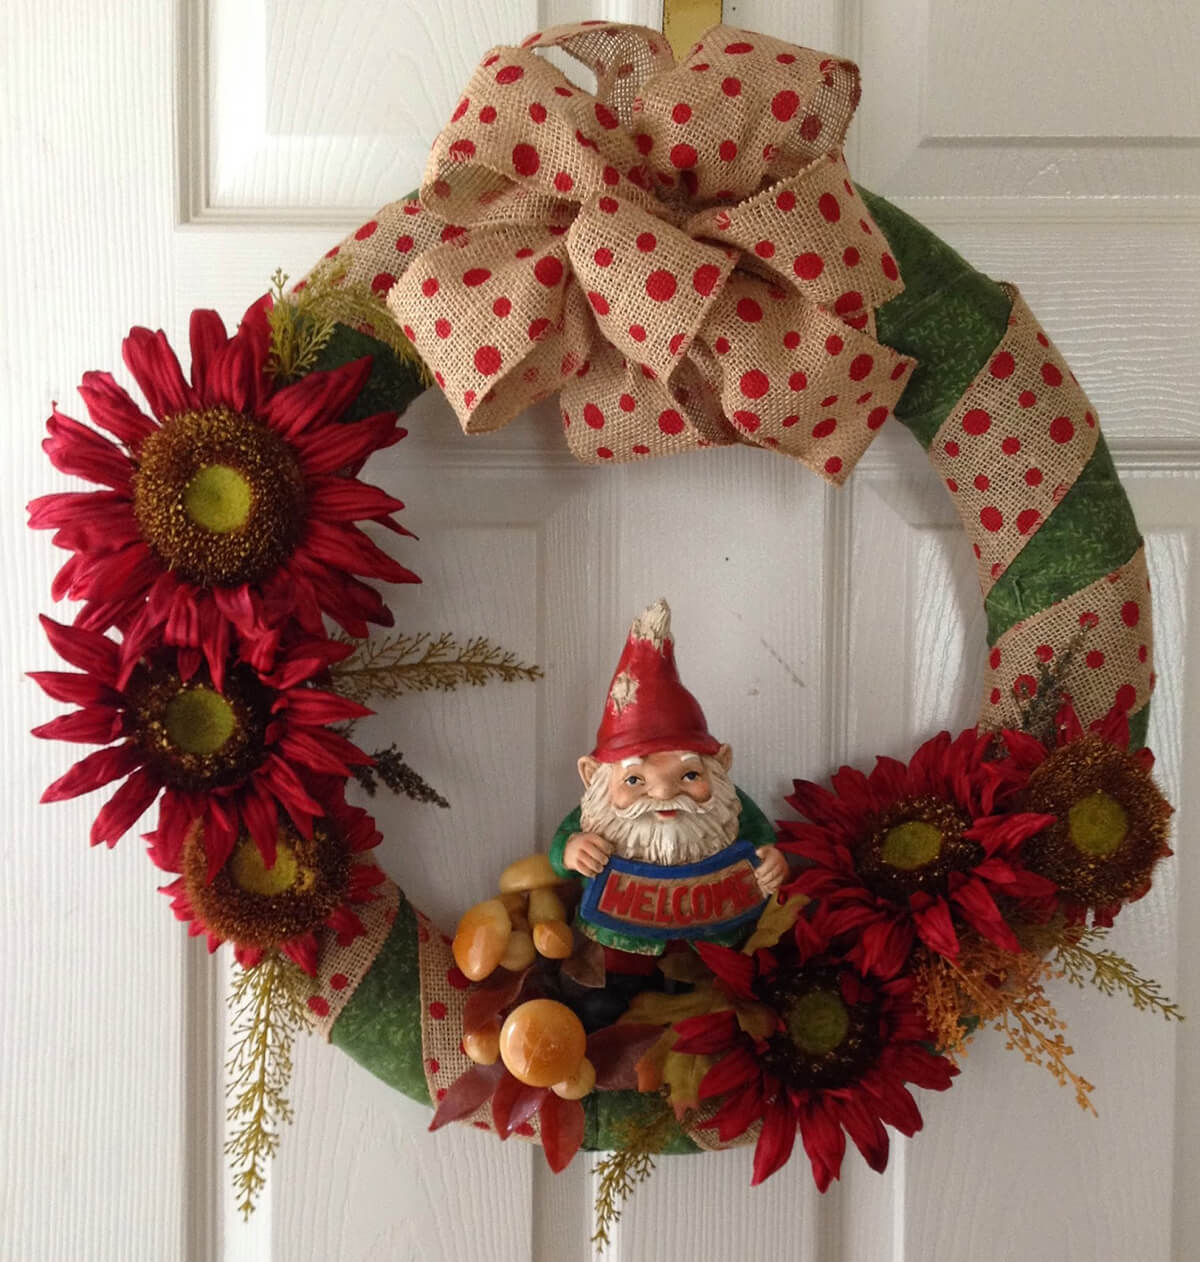 Fall-Inspired Wreath with Gnome